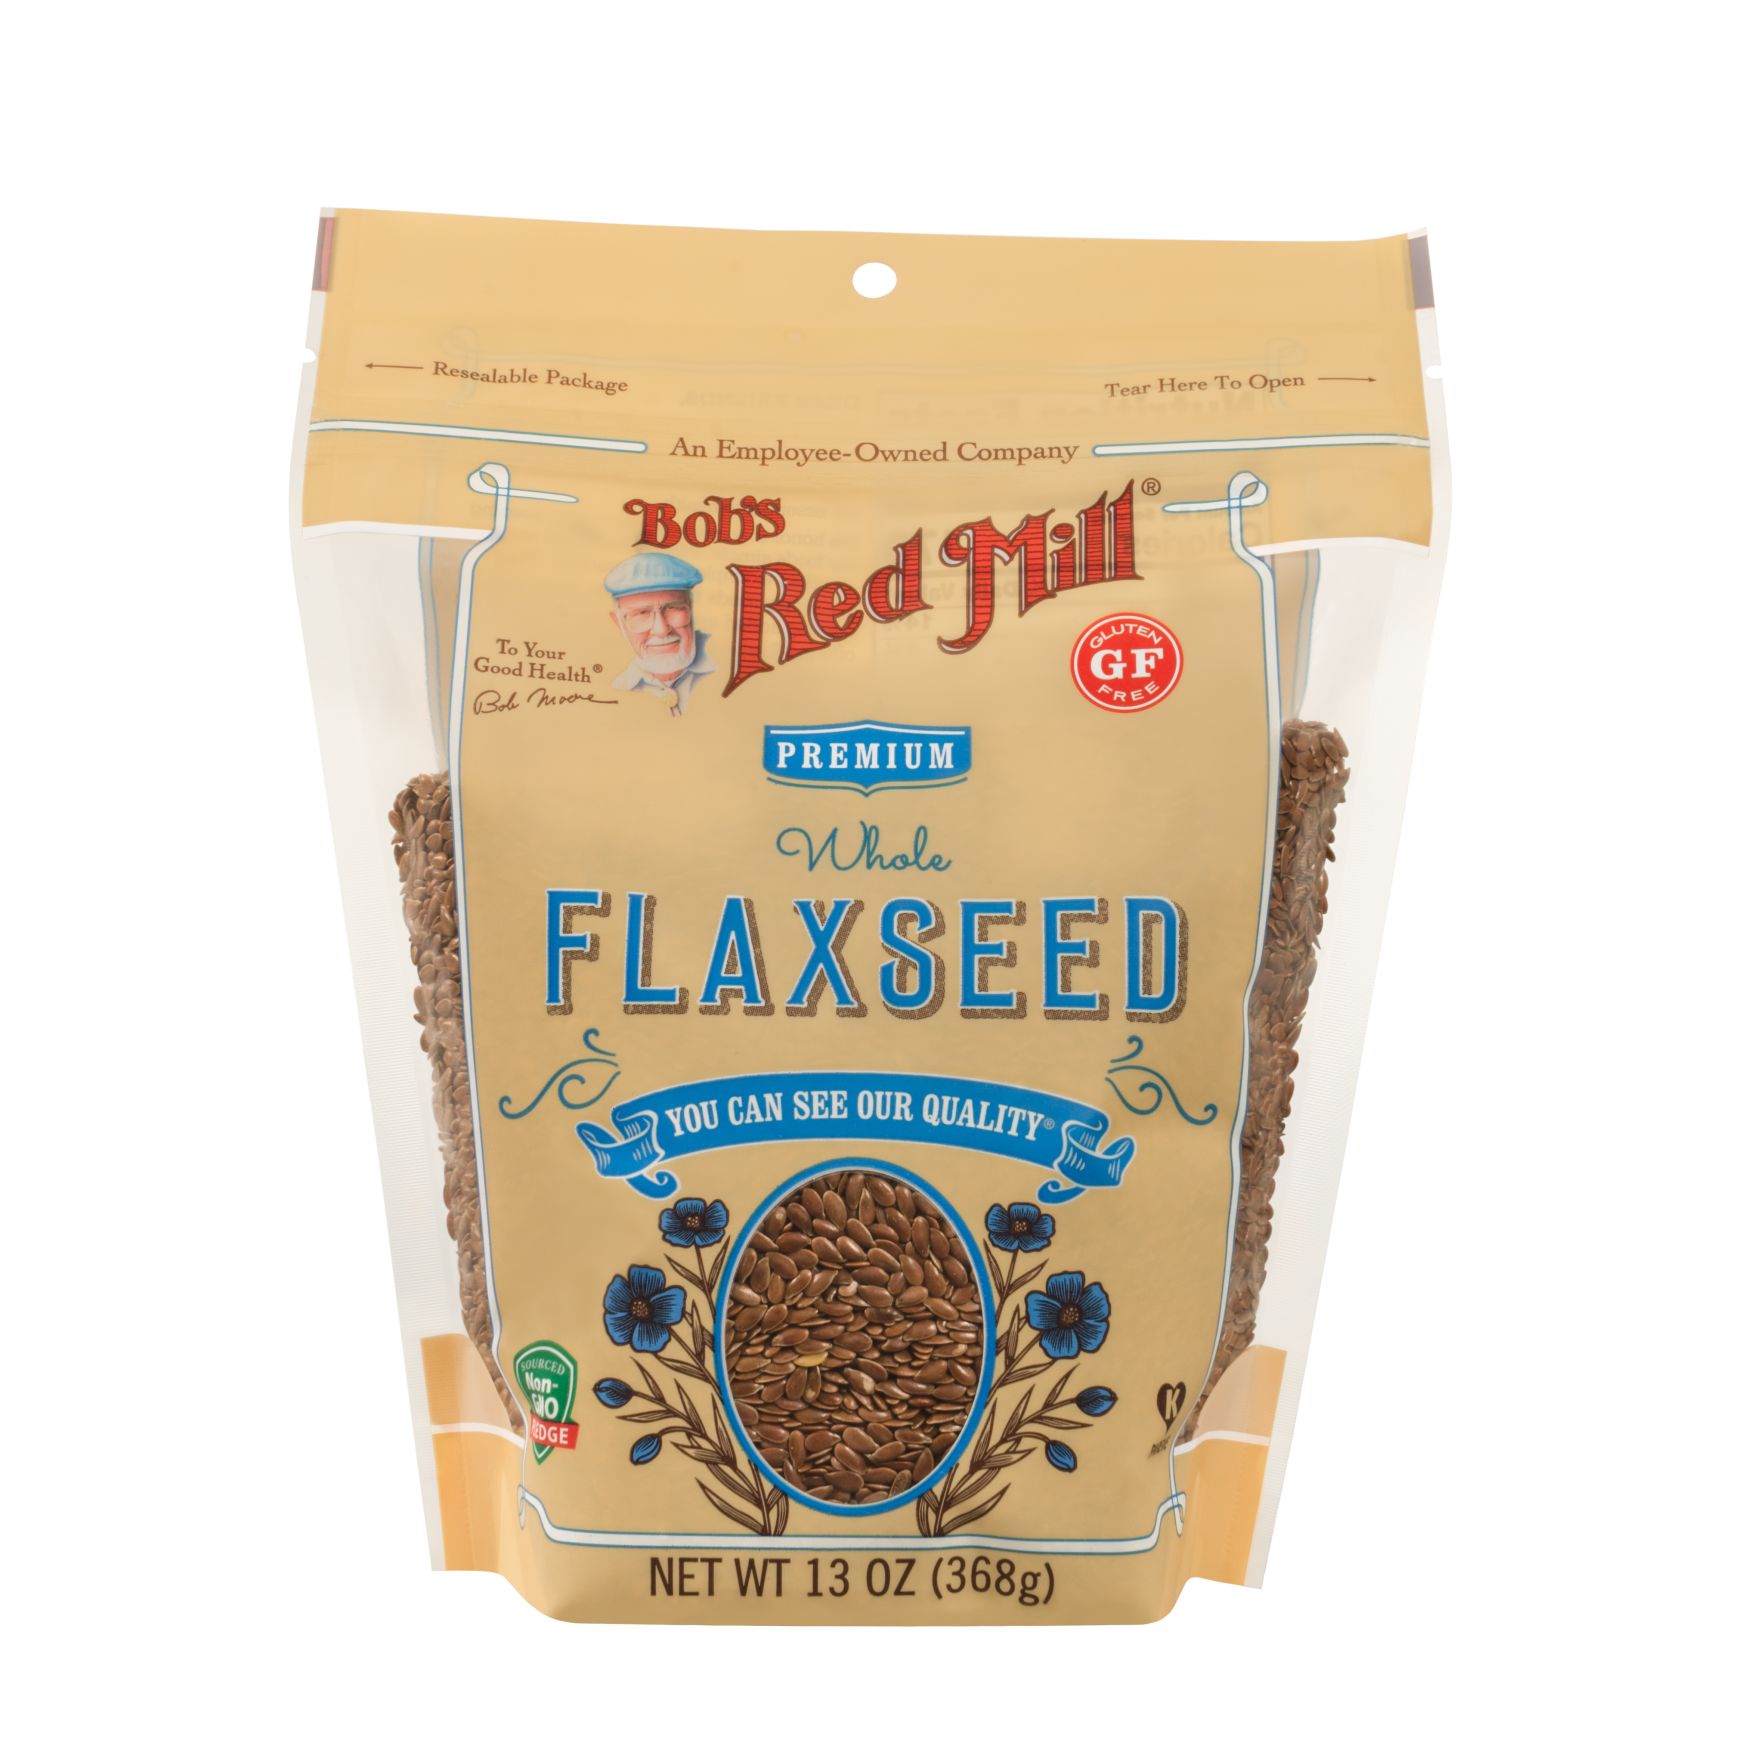 How To Grind Flaxseeds Using A Blender (Ground Flaxseeds)